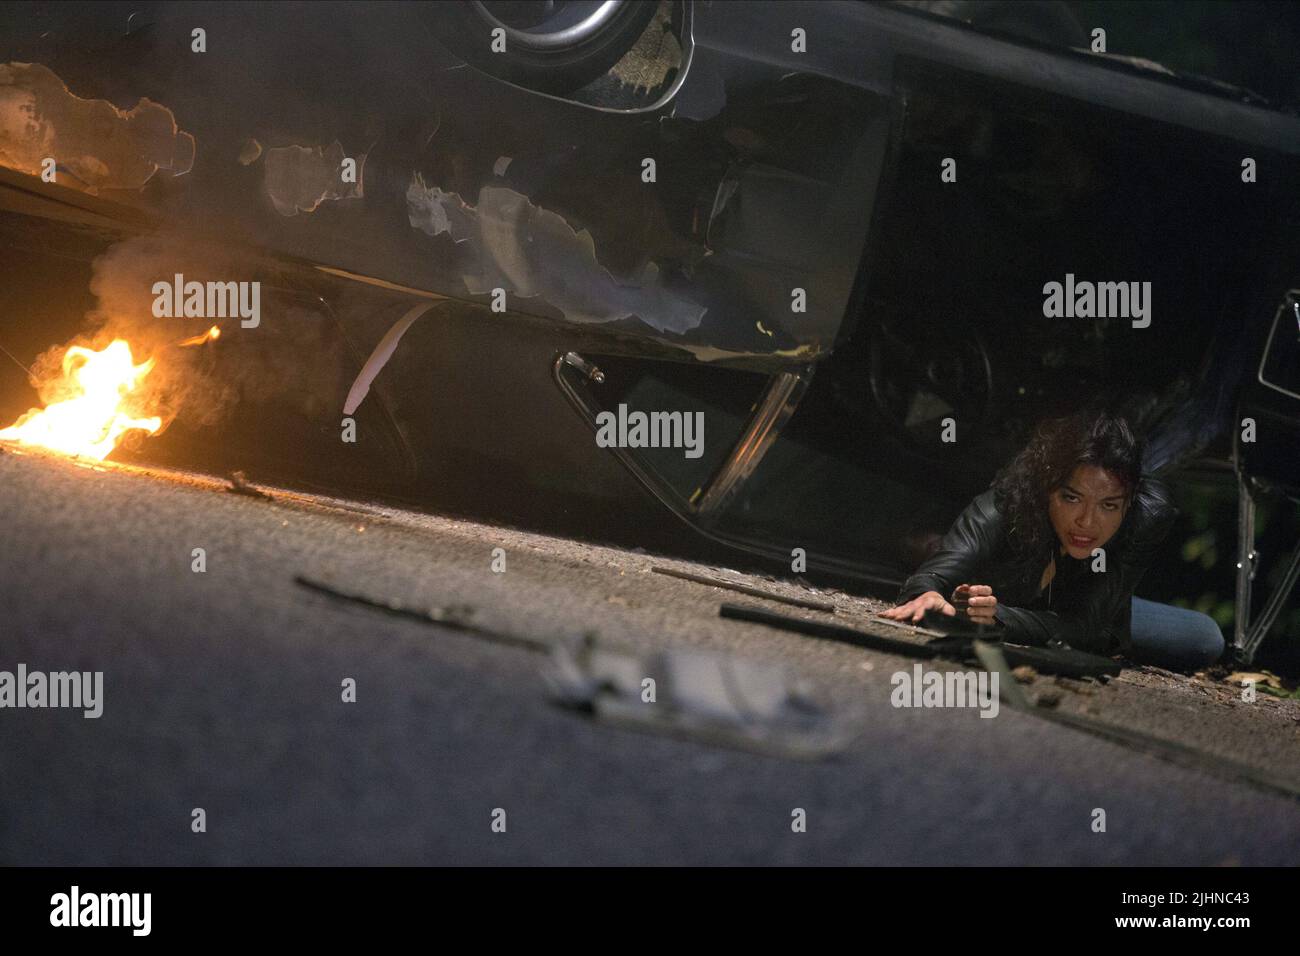 MICHELLE RODRIGUEZ, Fast and Furious 6, 2013 Banque D'Images